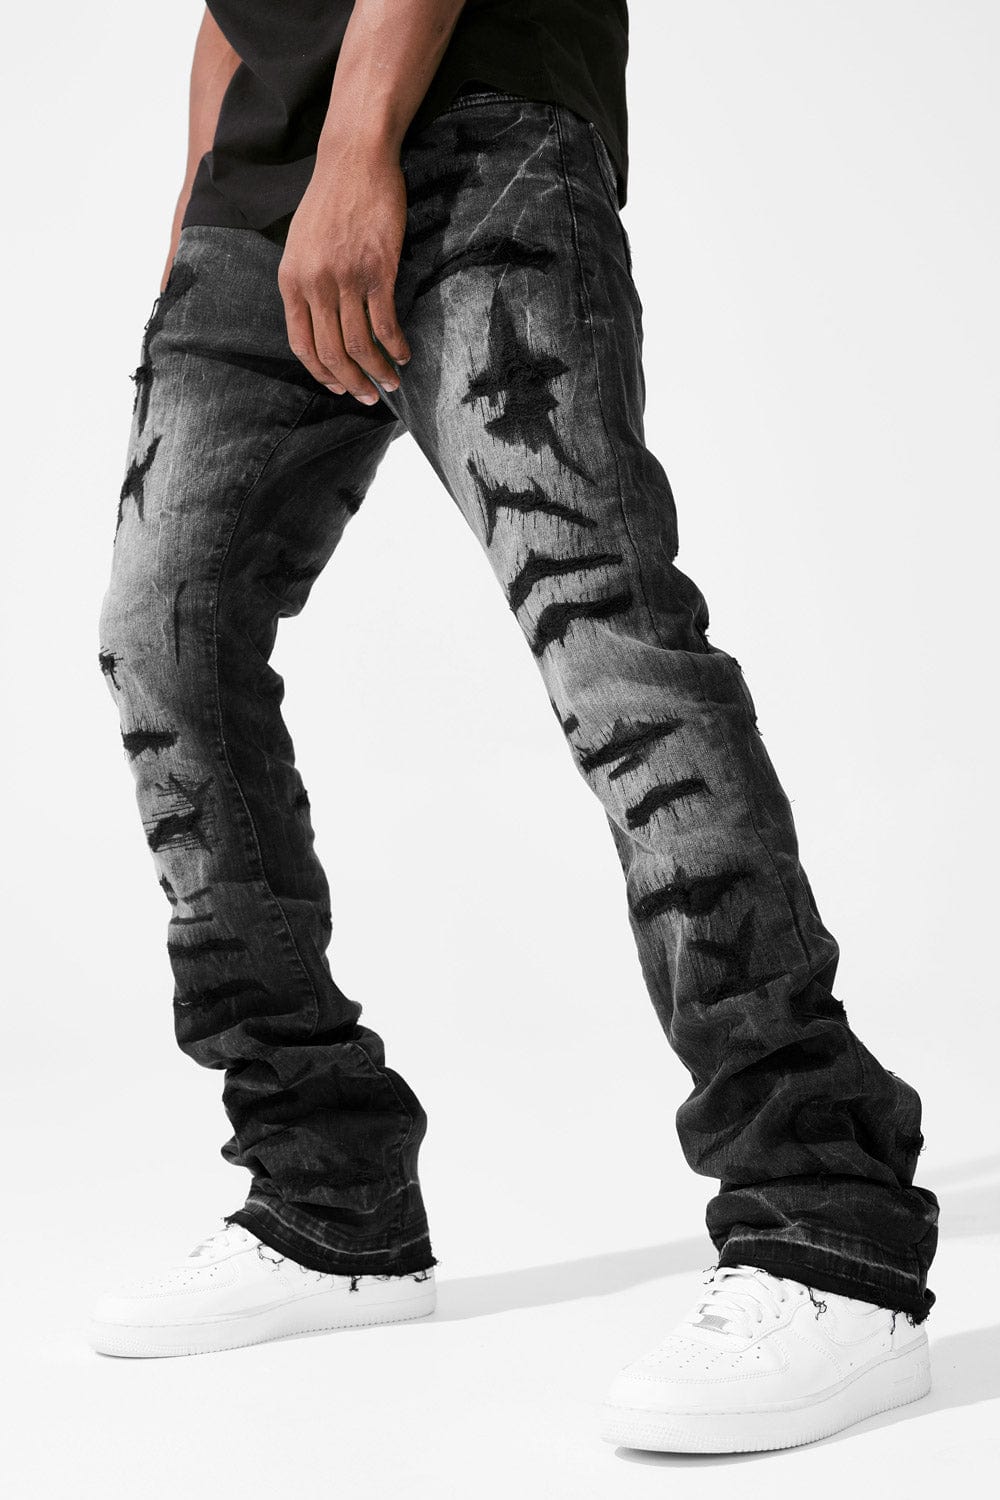 High Street Retro Black Stacked Jeans Mens With Heavy Industry